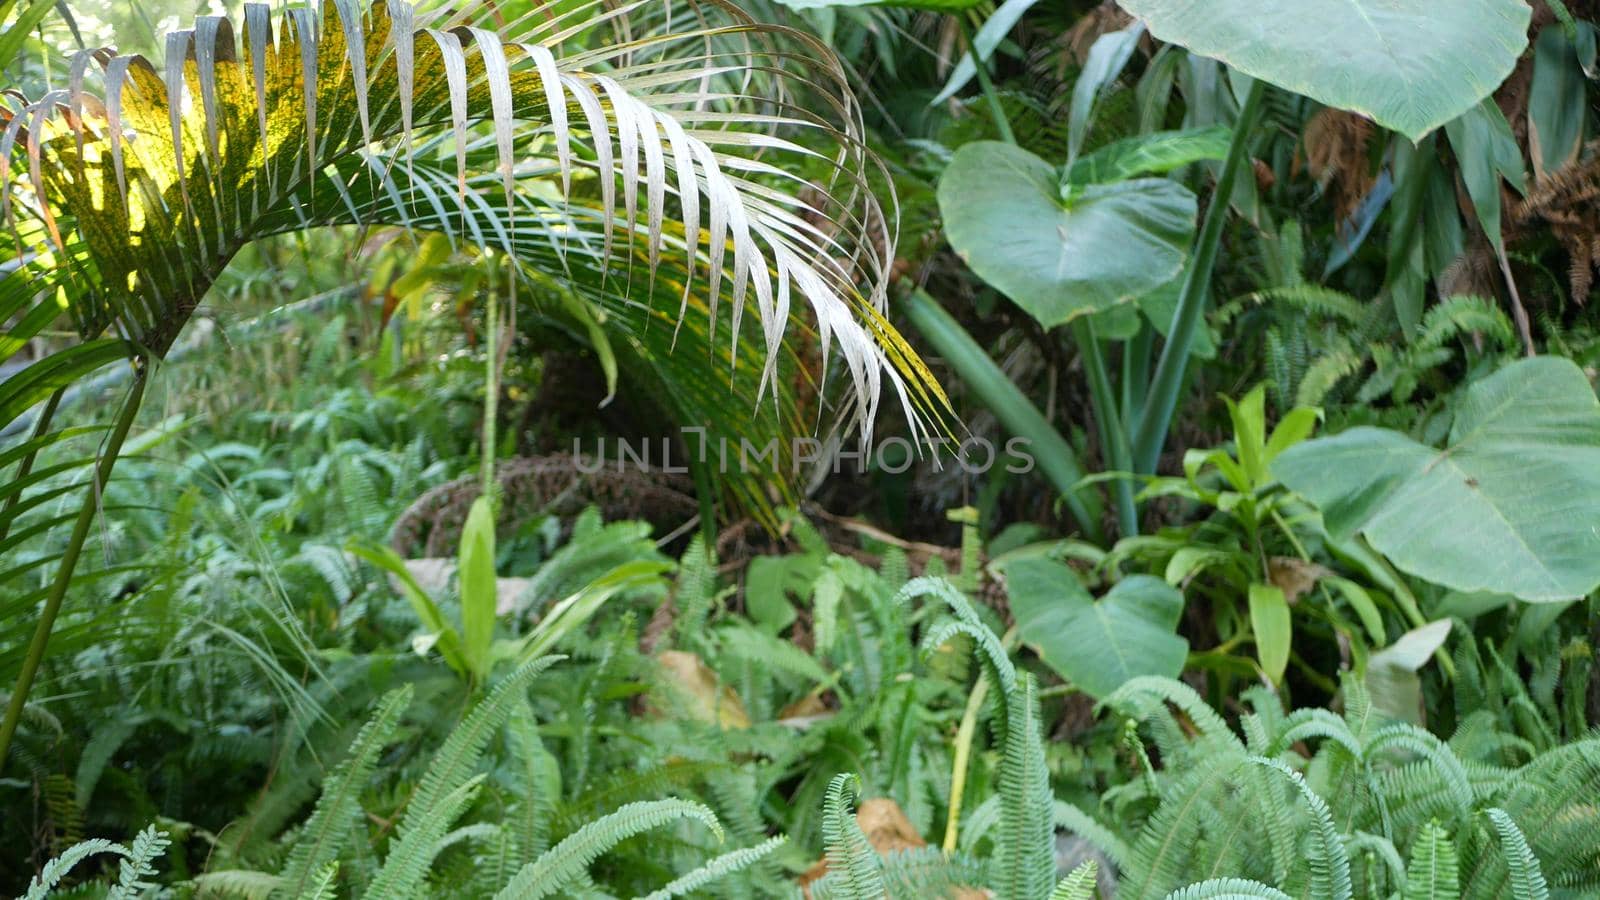 Exotic jungle rainforest tropical atmosphere. Fern, palms and fresh juicy frond leaves, amazon dense overgrown deep forest. Dark natural greenery lush foliage. Evergreen ecosystem. Paradise aesthetic.